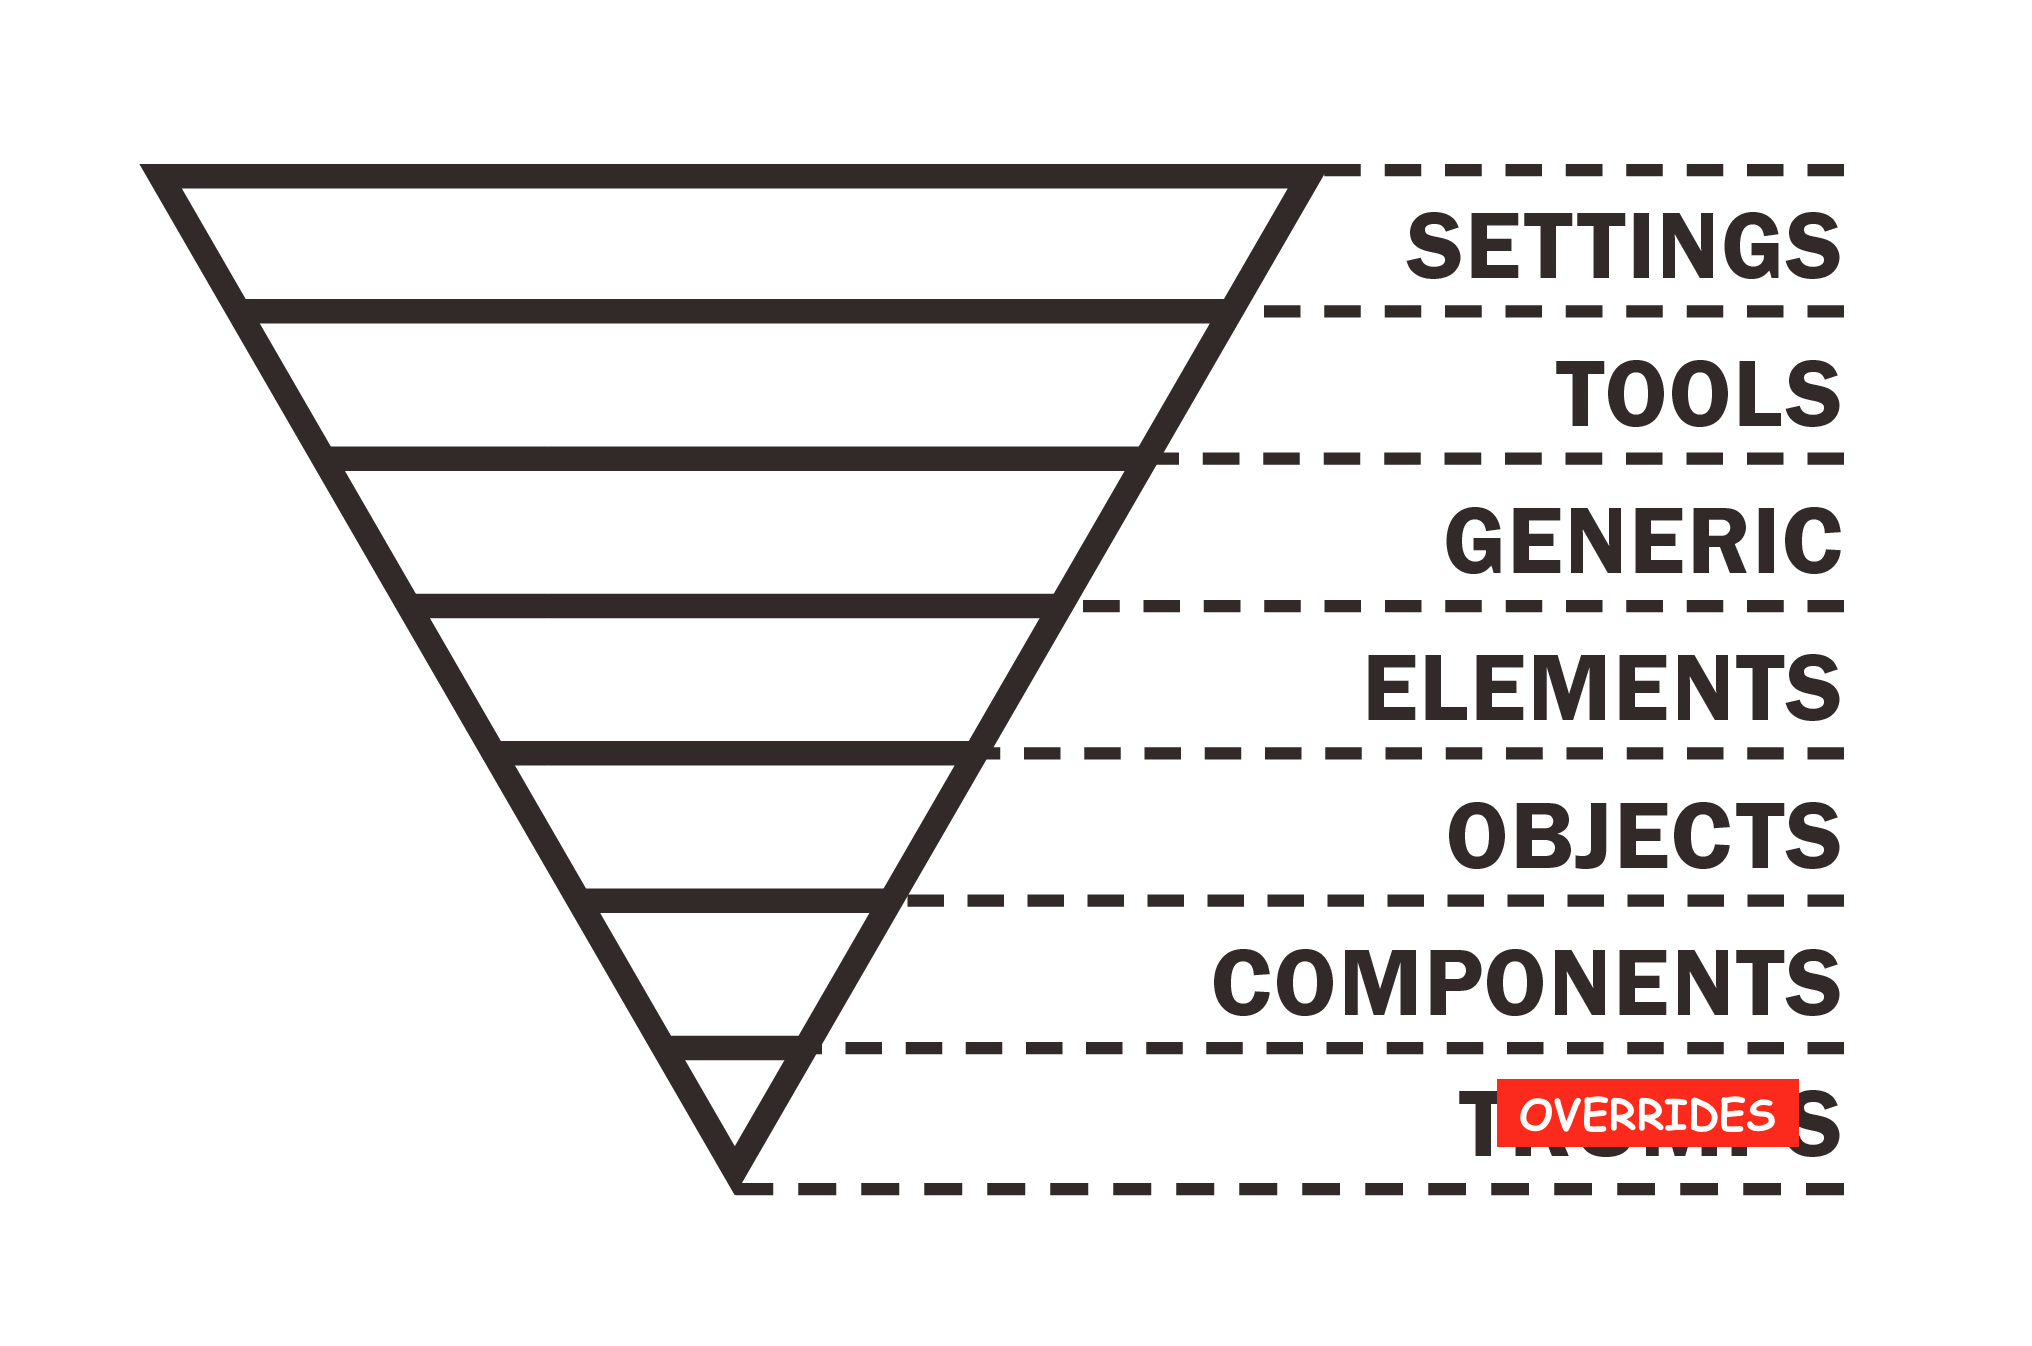 A triangle pointing down,
with labeled layers from top —
settings, tools, generic,
elements, objects, components,
overrides
